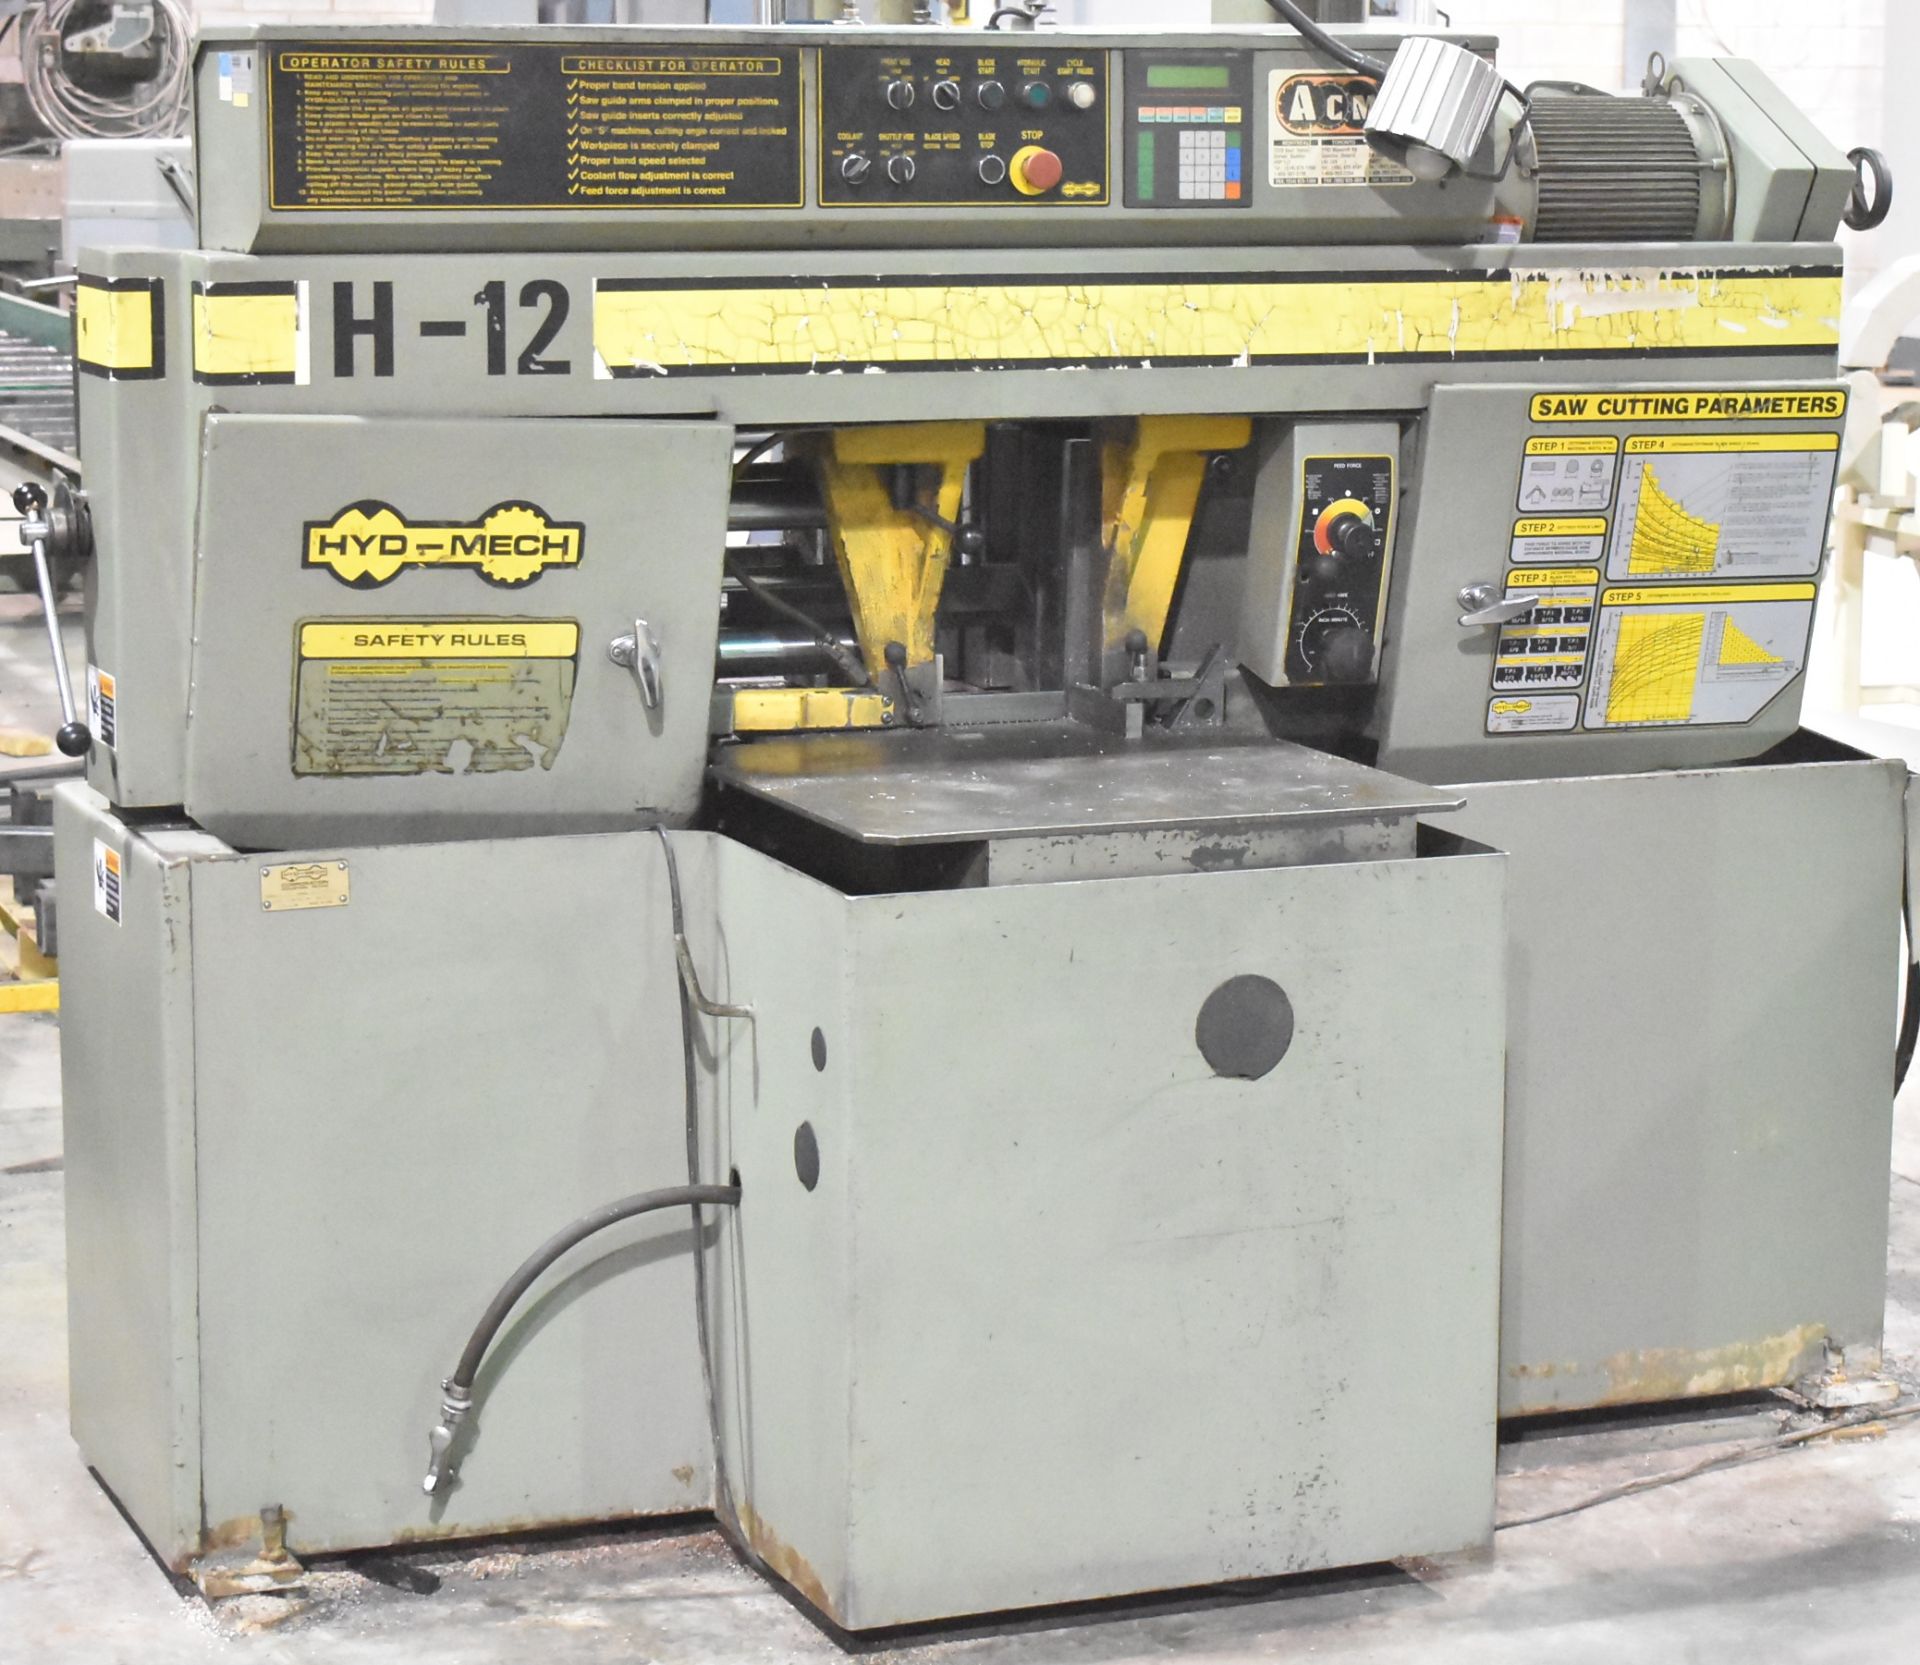 HYD-MECH H-12 DOUBLE MITRE BAND SAW, S/N: A0898077H (CI) [RIGGING FEES FOR LOT #53 - $450 CDN - PLUS